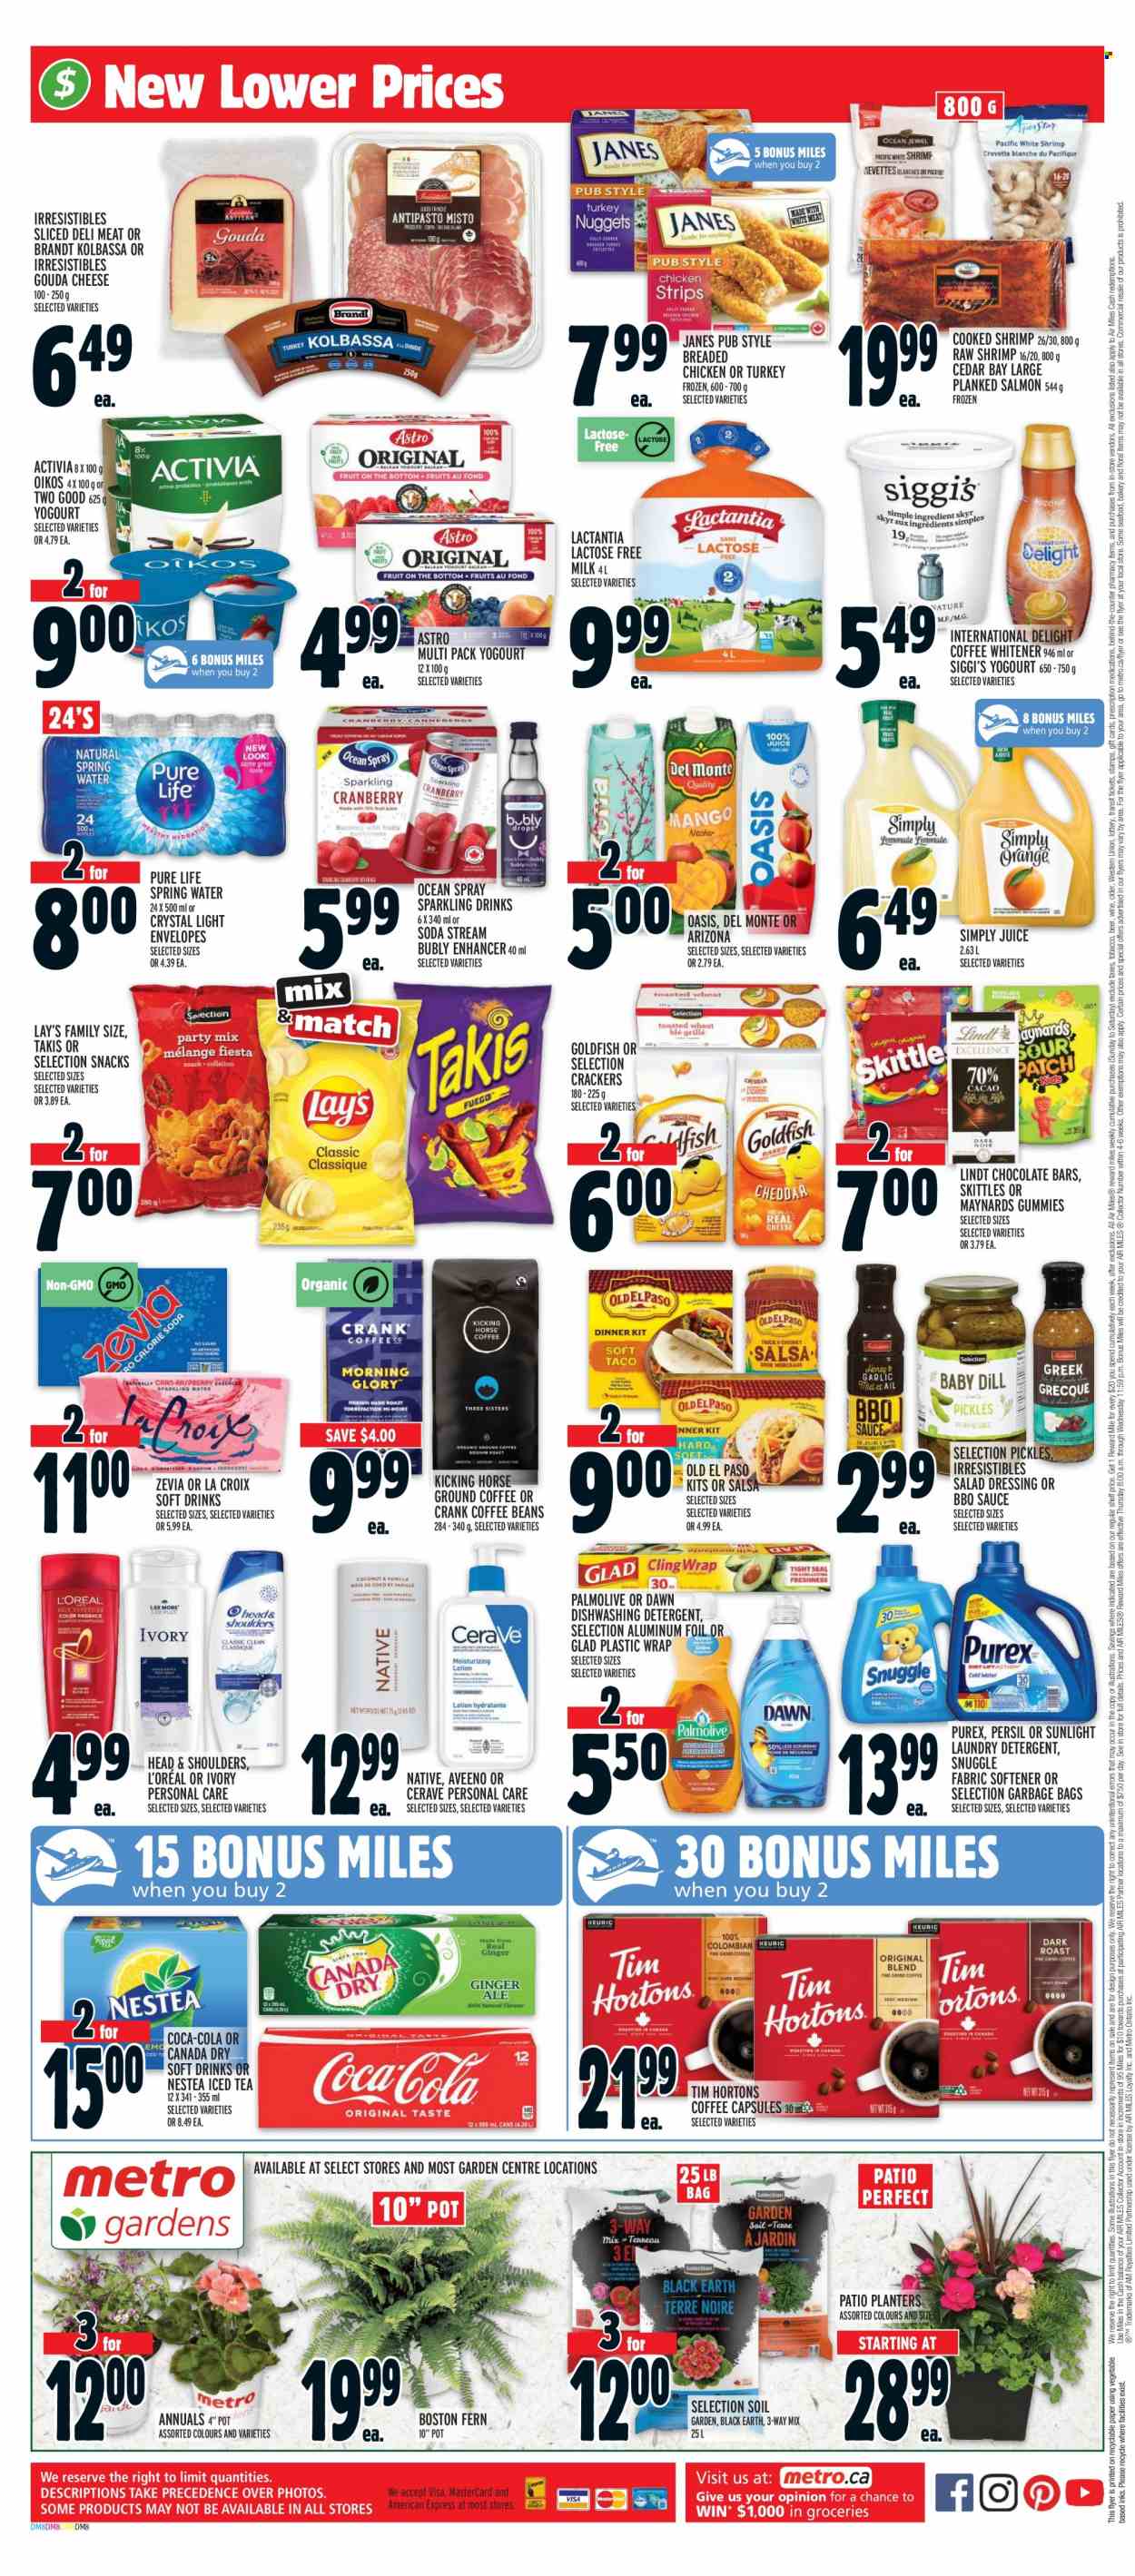 thumbnail - Metro Flyer - June 08, 2023 - June 14, 2023 - Sales products - Old El Paso, seafood, shrimps, sauce, fried chicken, ready meal, breaded chicken, snack, gouda, Activia, Oikos, milk, lactose free milk, coffee whitener, crackers, Skittles, chocolate bar, Lay’s, Goldfish, Del Monte, BBQ sauce, salad dressing, dressing, salsa, Planters, Canada Dry, Coca-Cola, juice, ice tea, soft drink, AriZona, spring water, water, coffee beans, ground coffee, coffee capsules, alcohol, cider, beer, turkey, Aveeno, detergent, Snuggle, Persil, fabric softener, laundry detergent, Sunlight, Purex, Palmolive, CeraVe, L’Oréal, Head & Shoulders, bag, trash bags, pot, aluminium foil, envelope, paper, Lindt. Page 3.